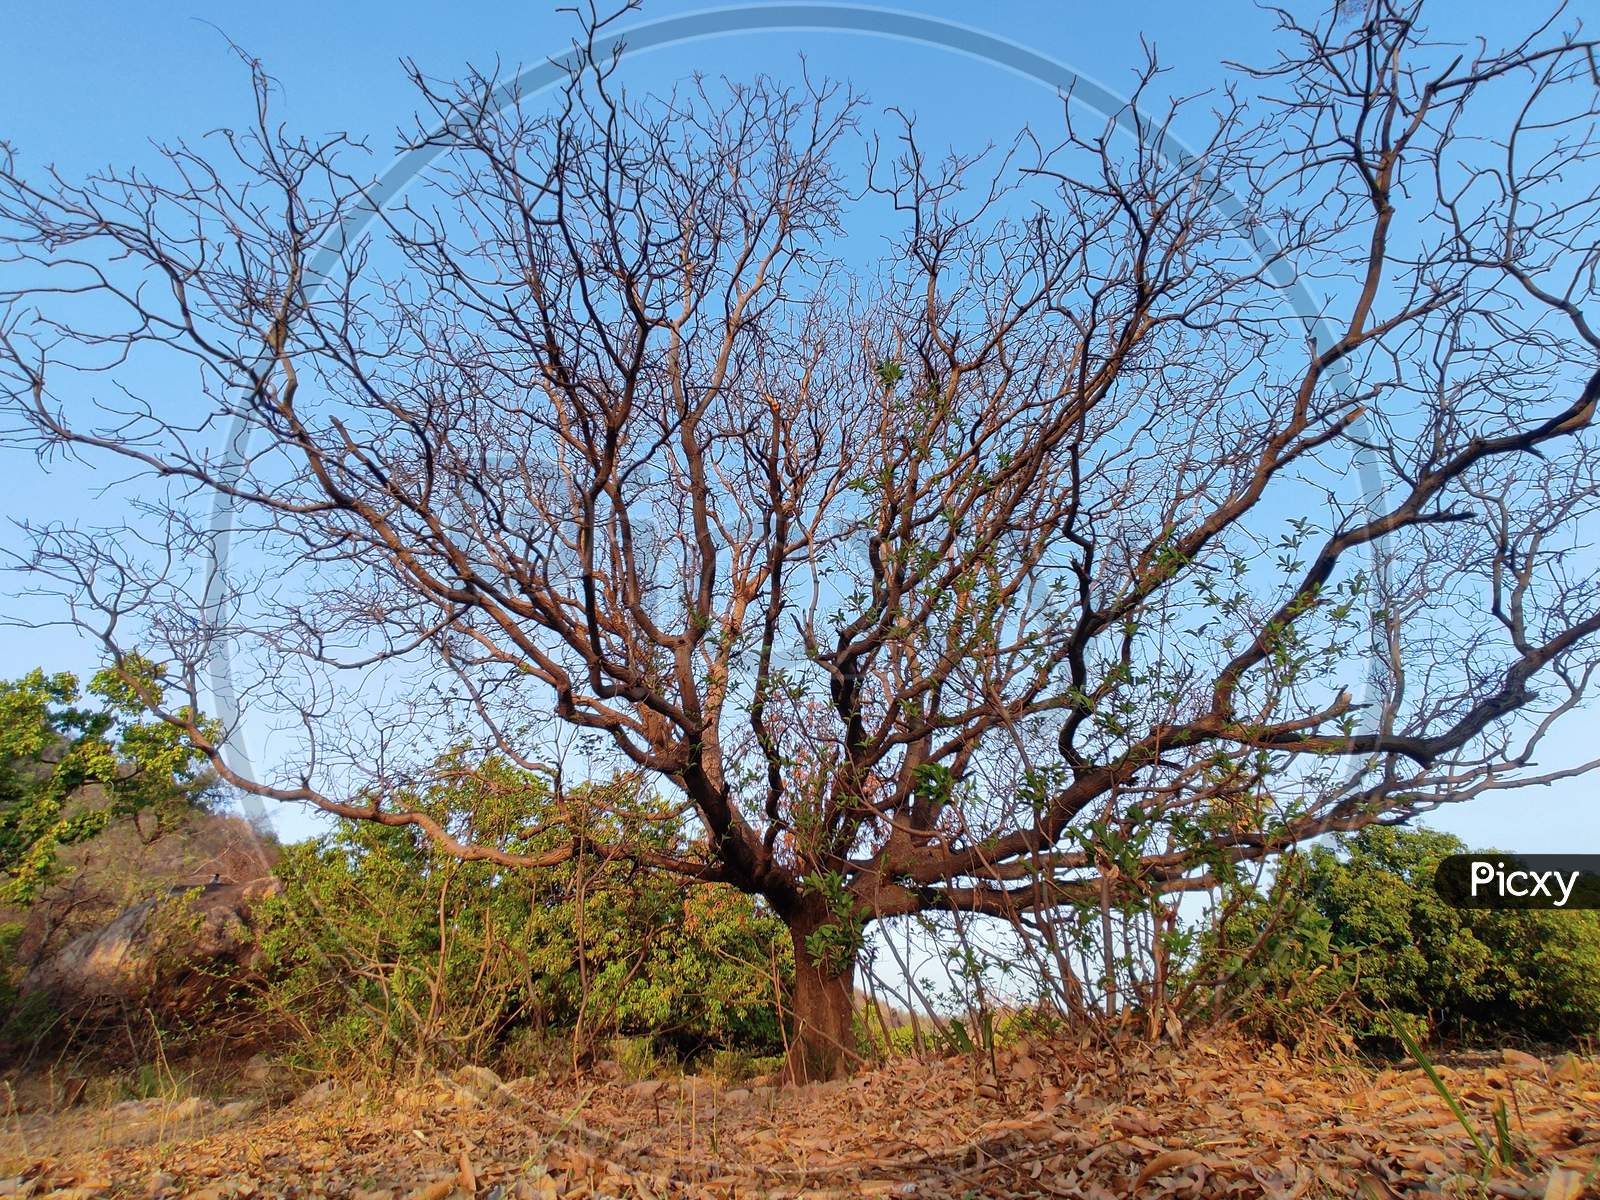 Dry tree without leafs